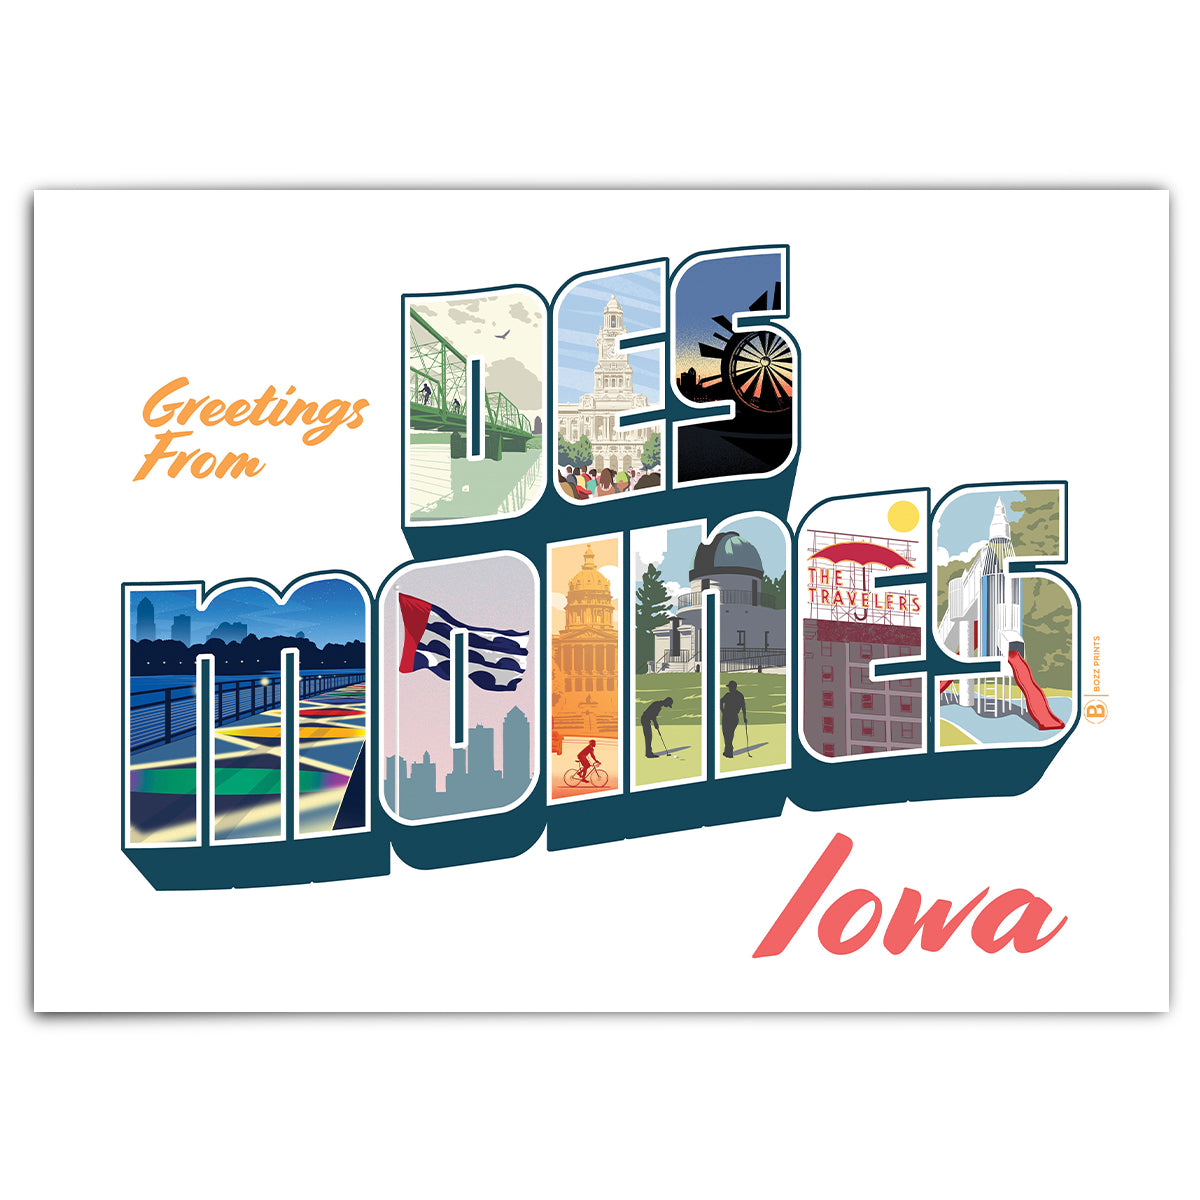 Greetings From Des Moines Greeting Card - Bozz Prints